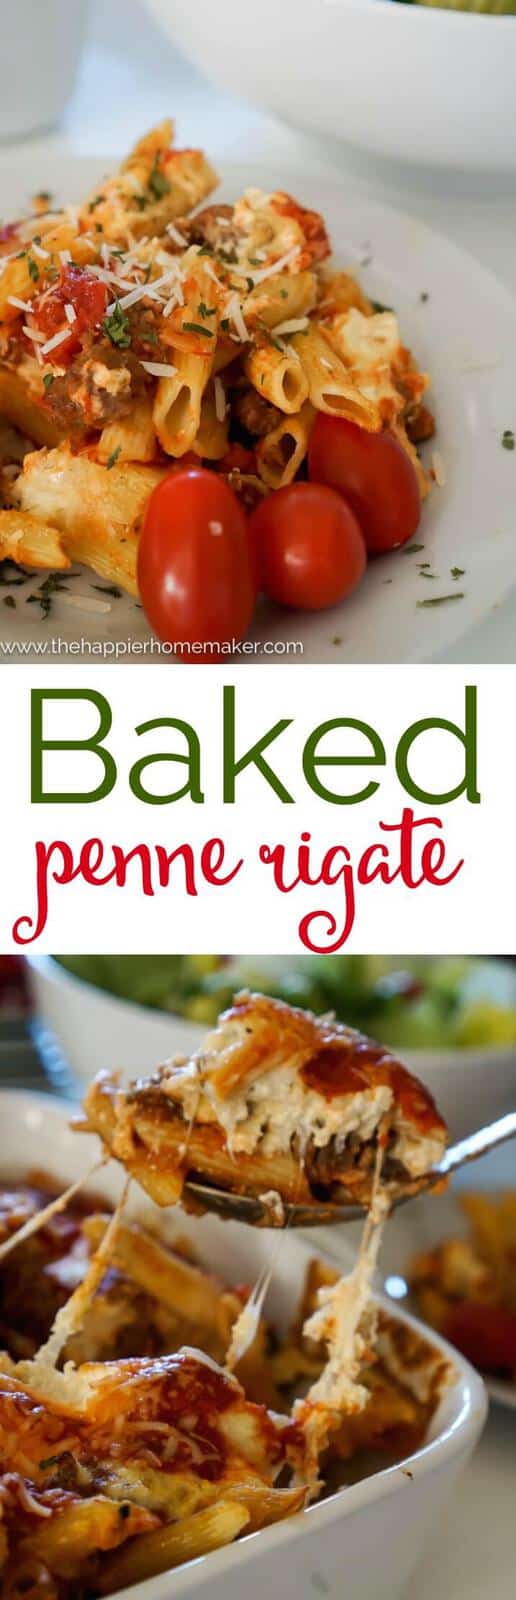 The words \"baked penne rigate\" in-between two pictures of tomatoes and baked penne rigate